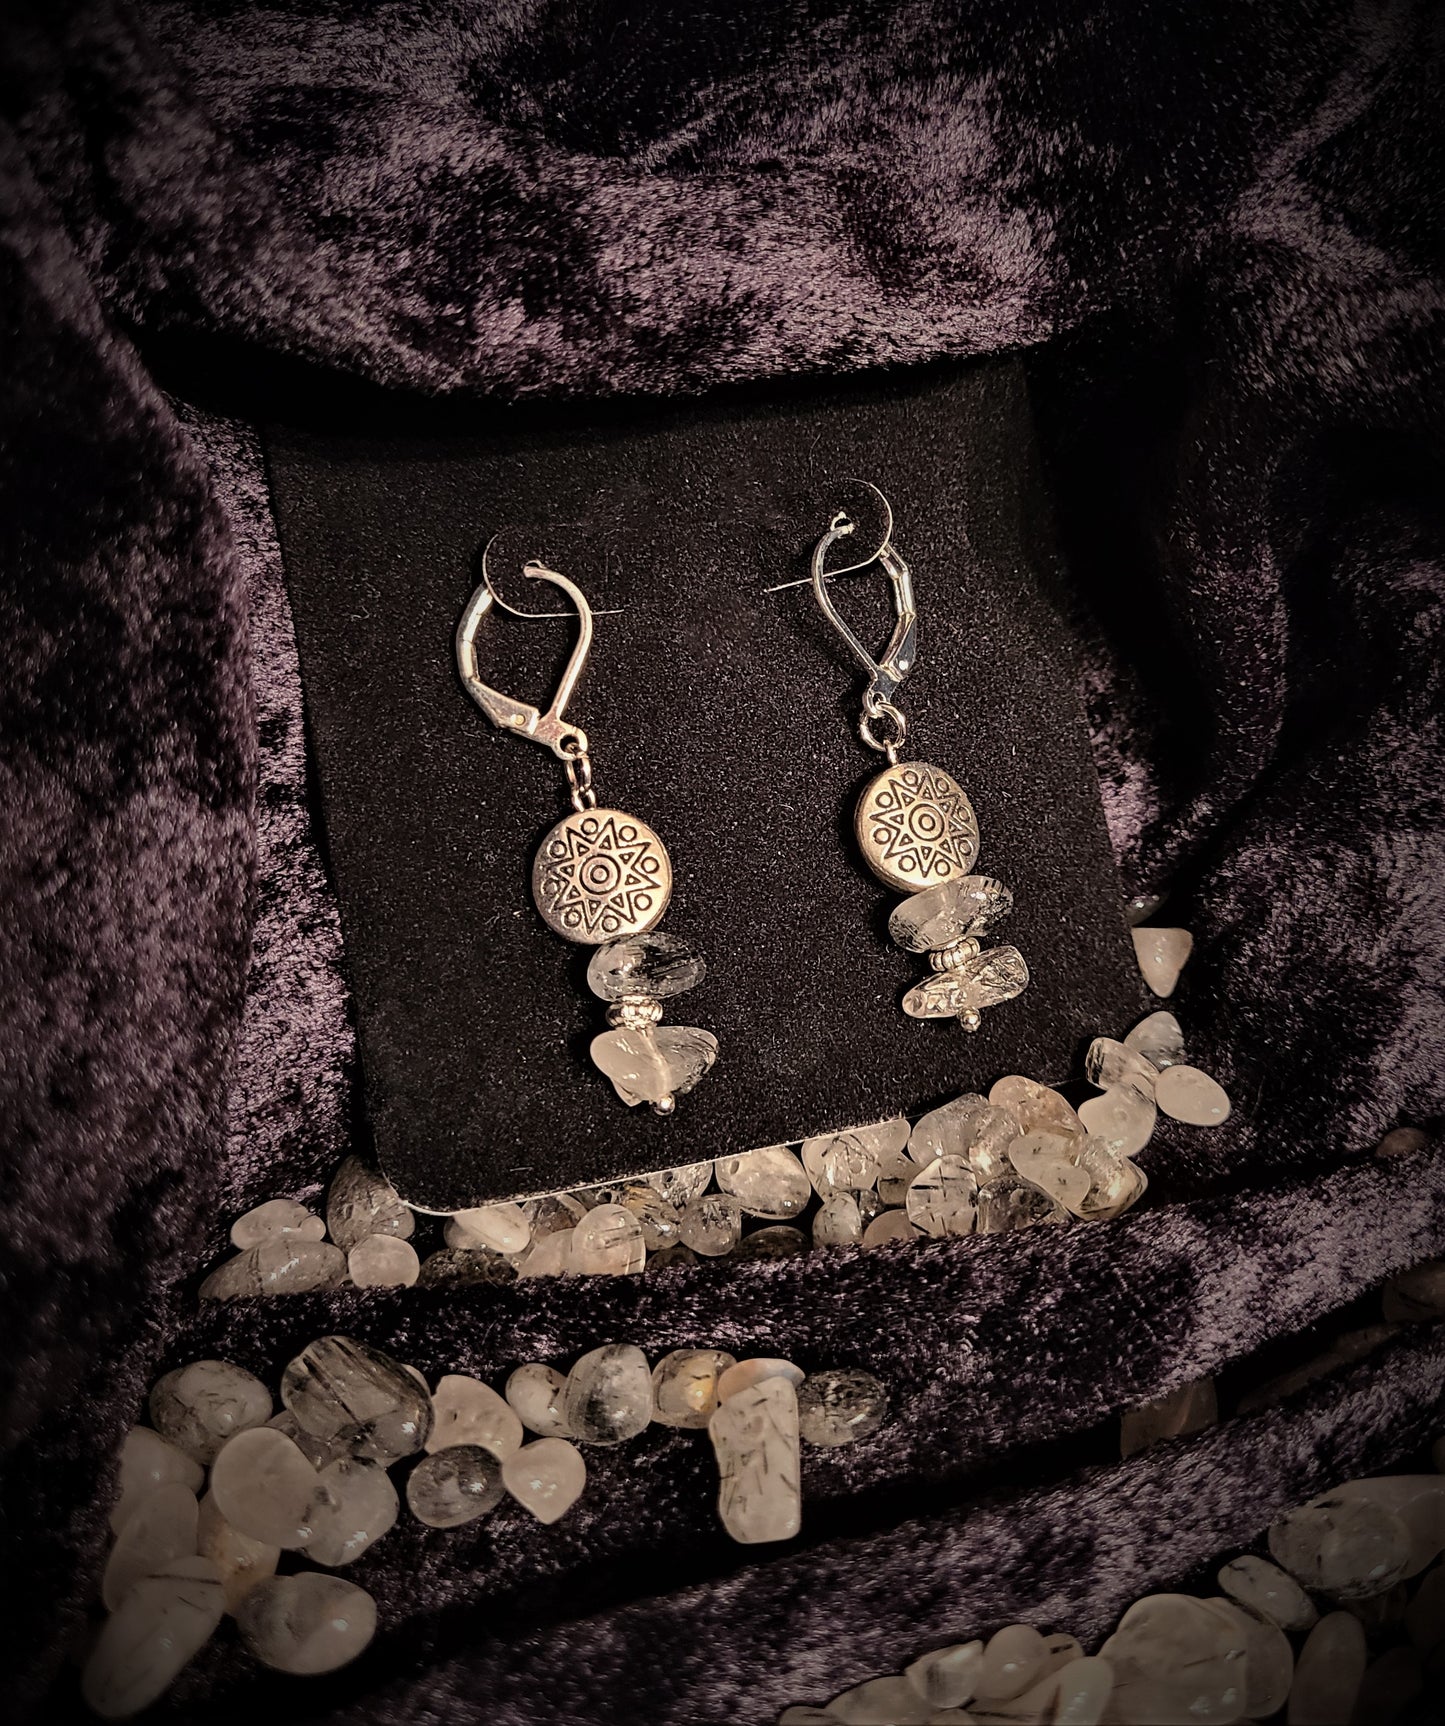 Earrings with silver lentils atop tourmalated quartz